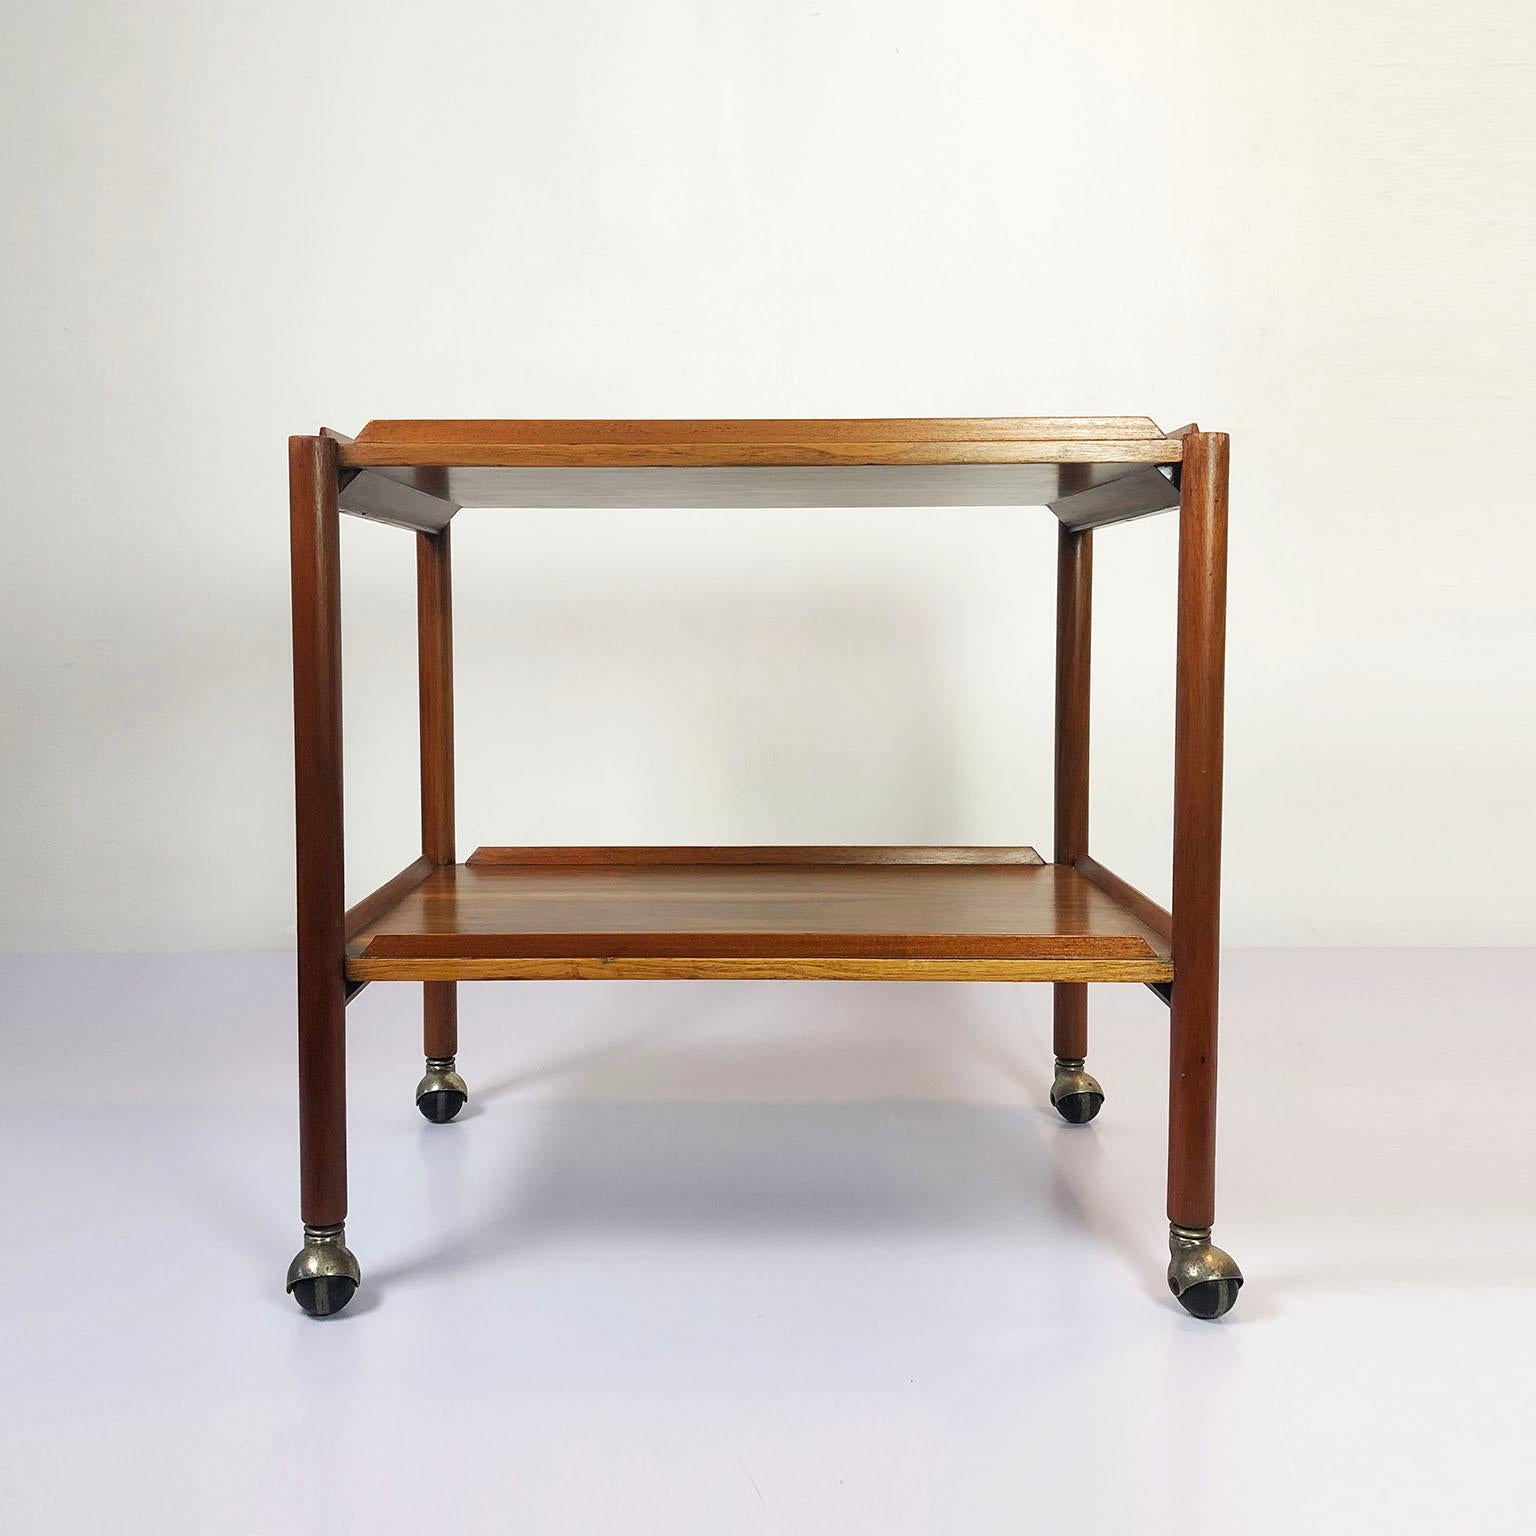 We offer this Mexican modernist serving cart designed by Michael van Beuren, Edimburgo line, made of mahogany wood, with two rectangular shelves and a wooden frame, circa 1970.